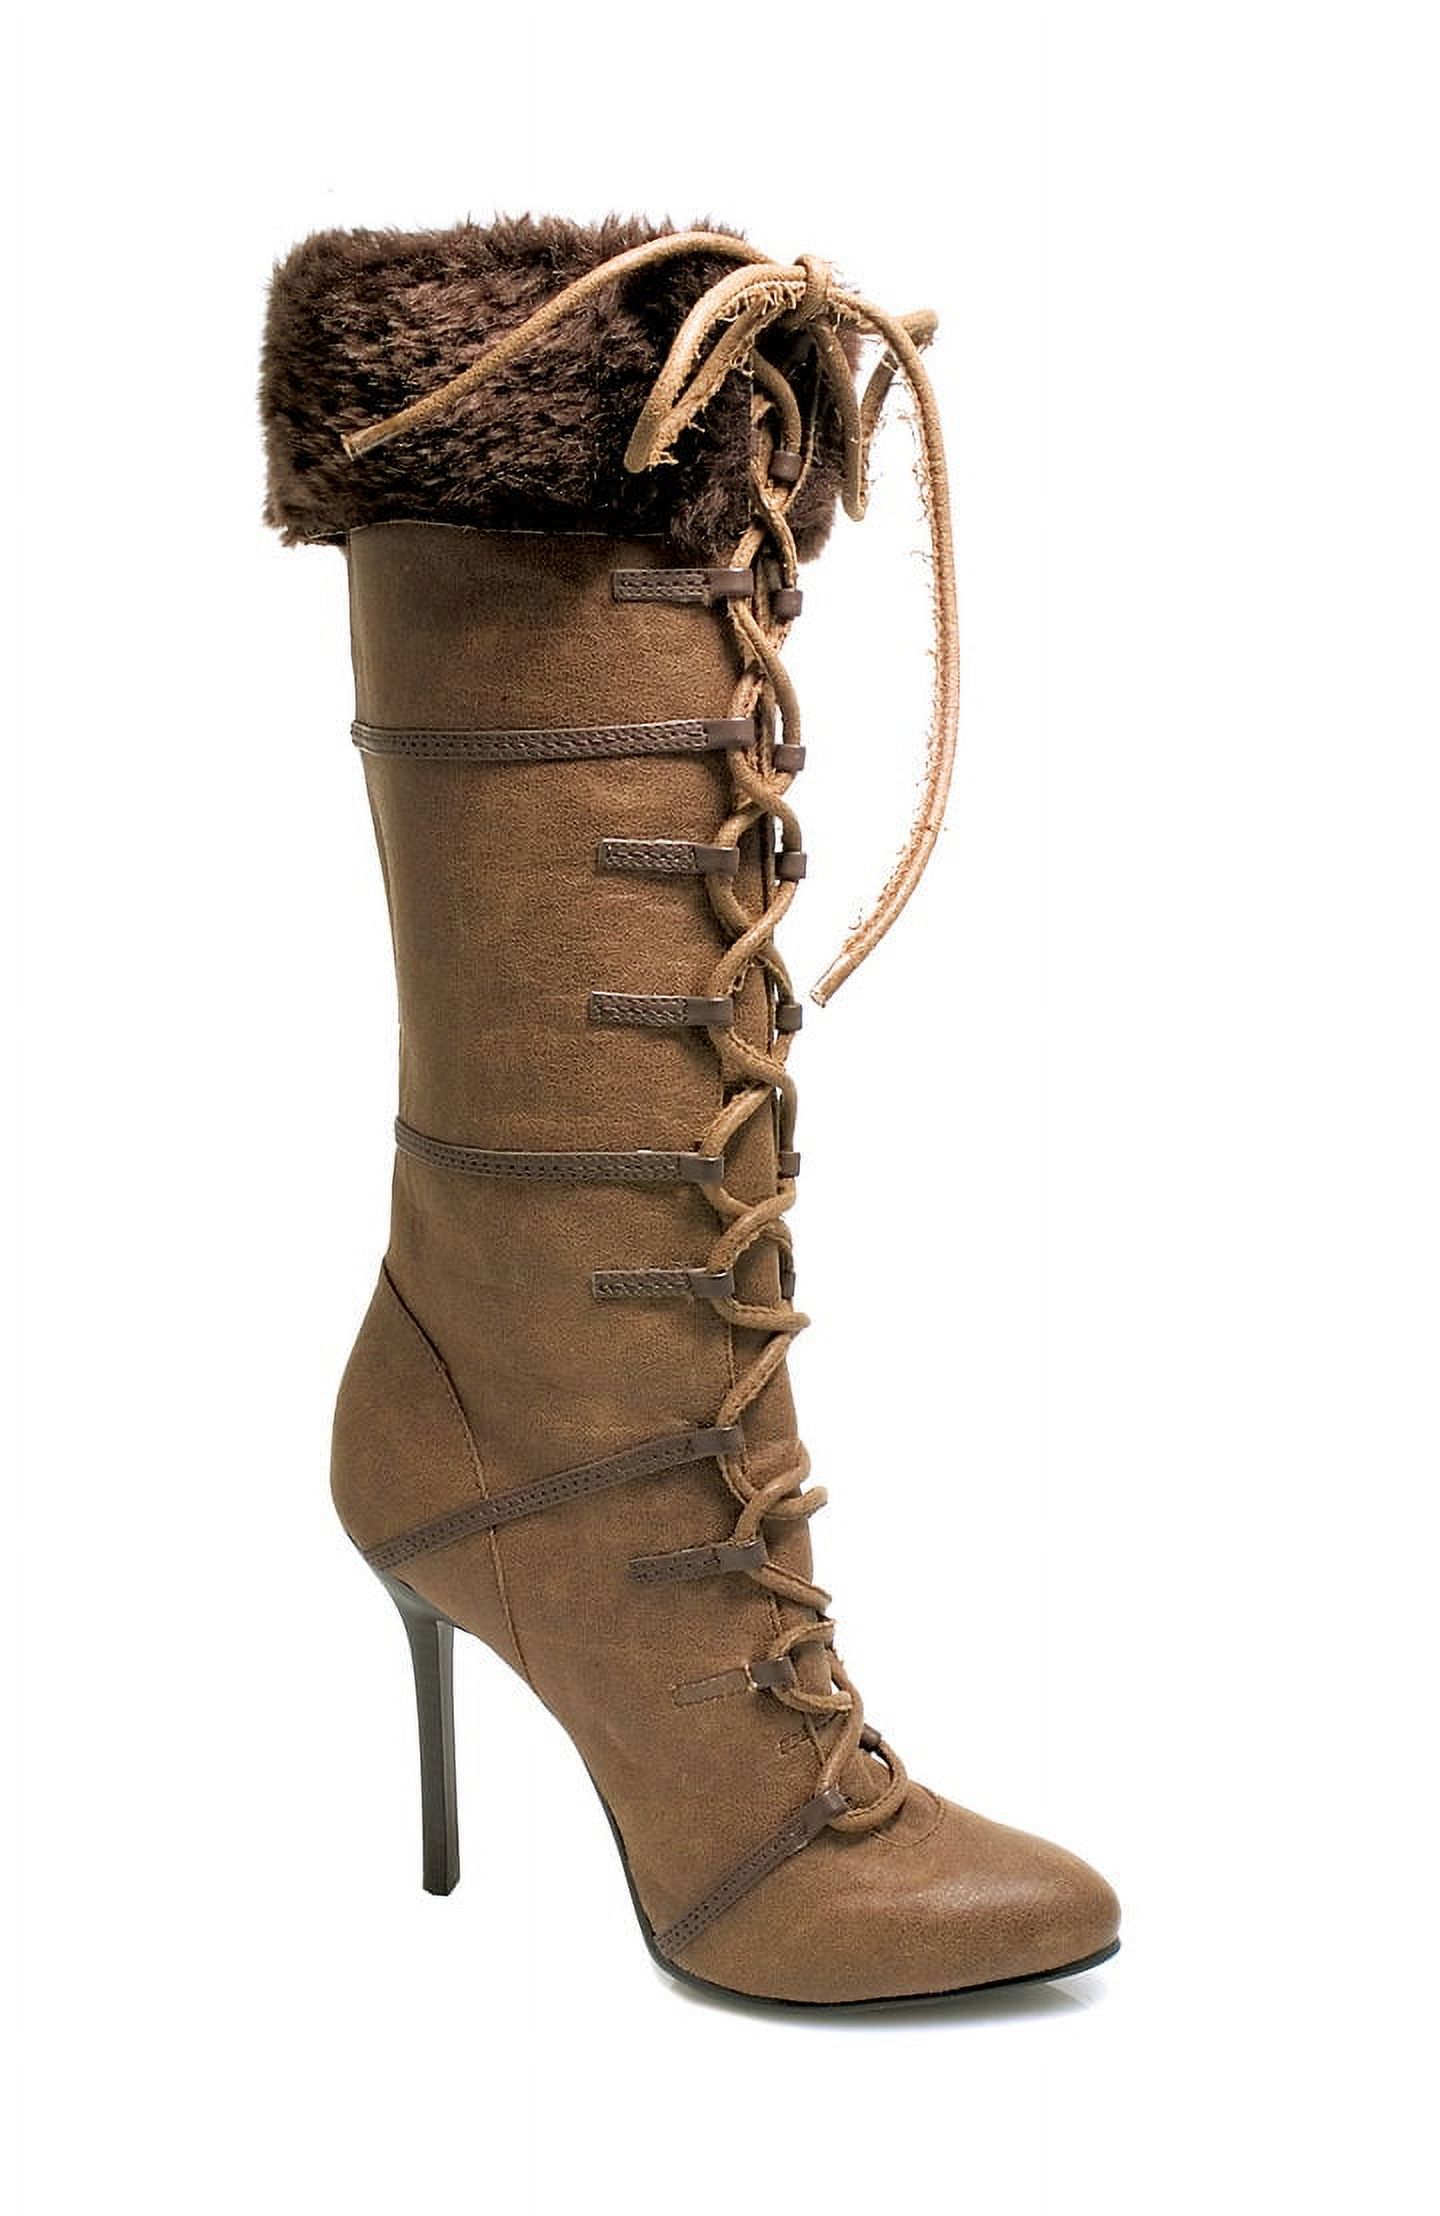 433VIKING Adult Boots - image 3 of 4